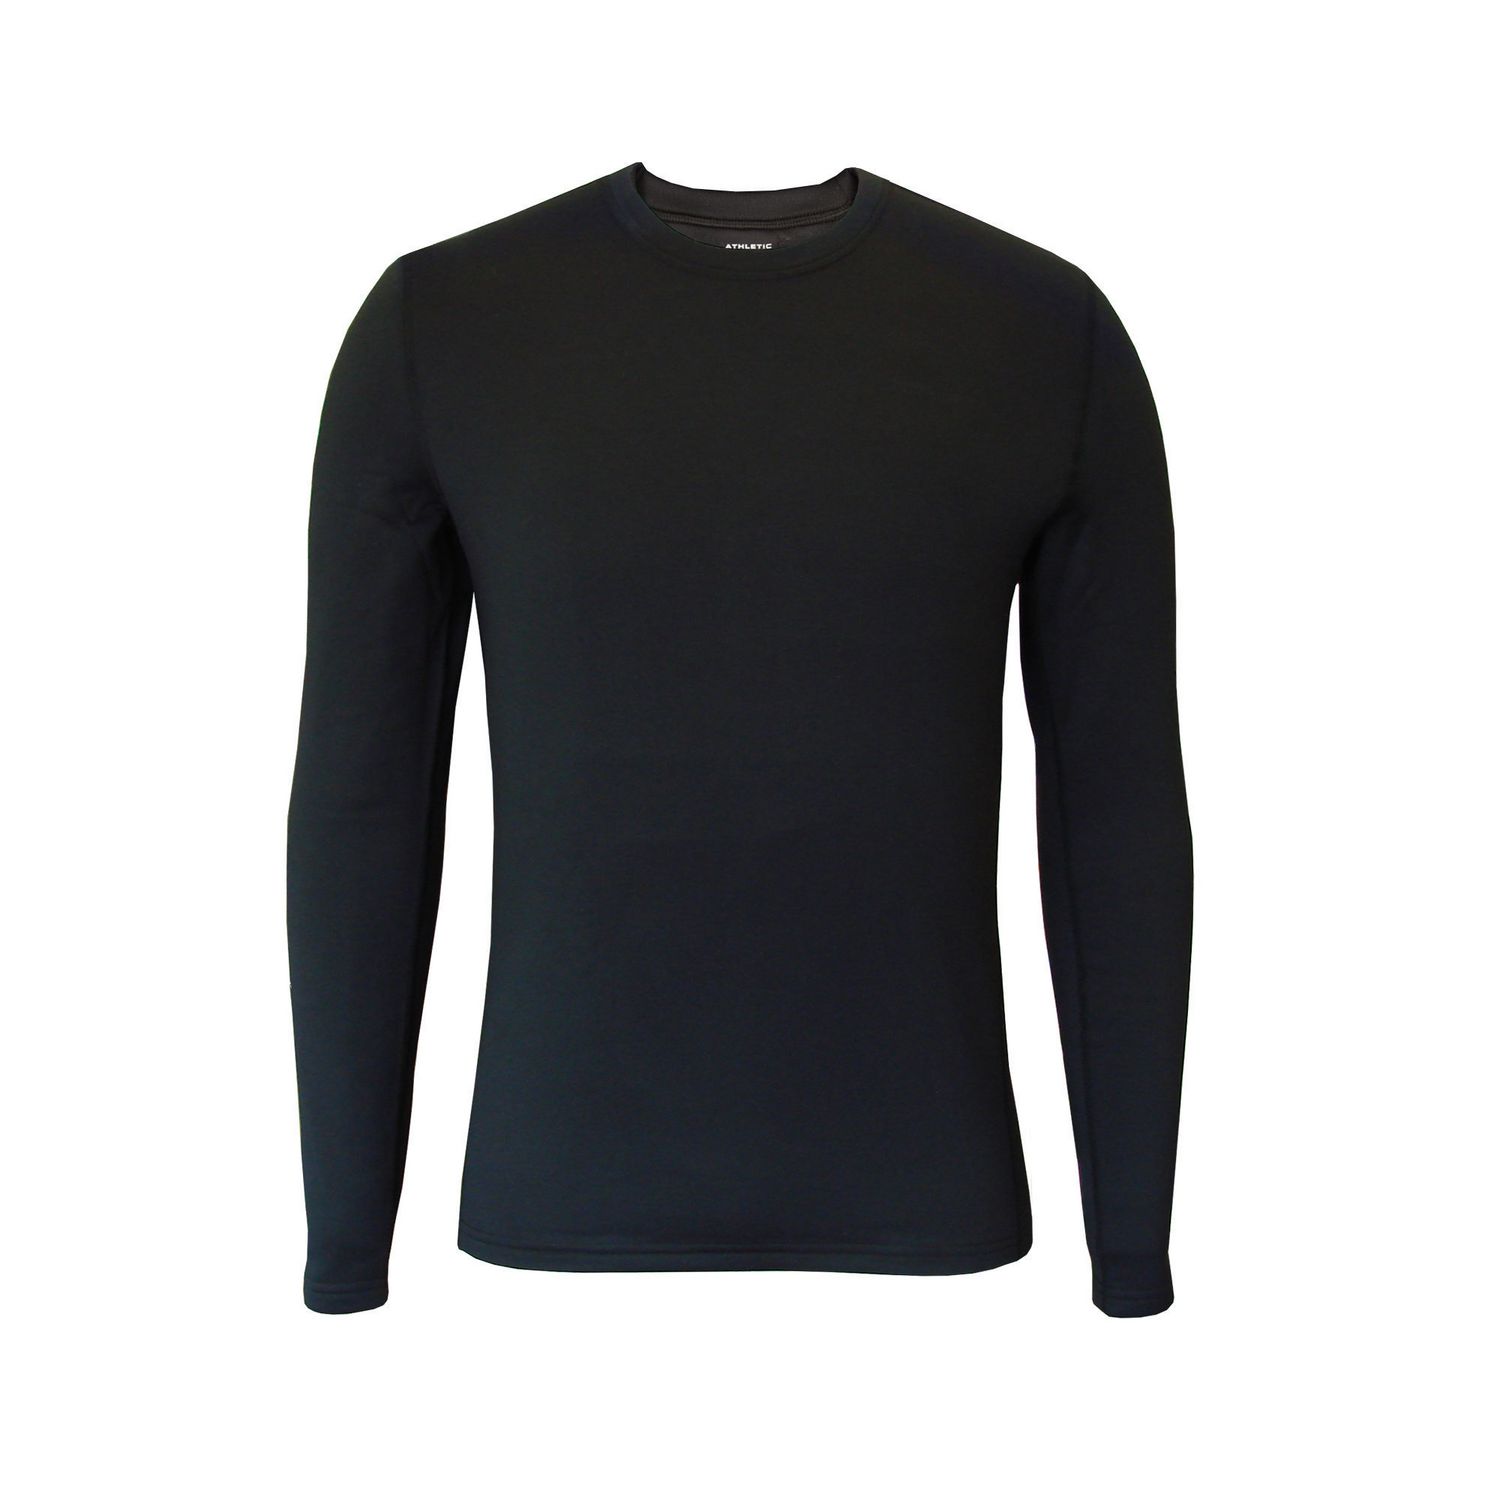 Athletic Works Men's Long Sleeve Fleece, Mid Weight Thermal Crew Neck 